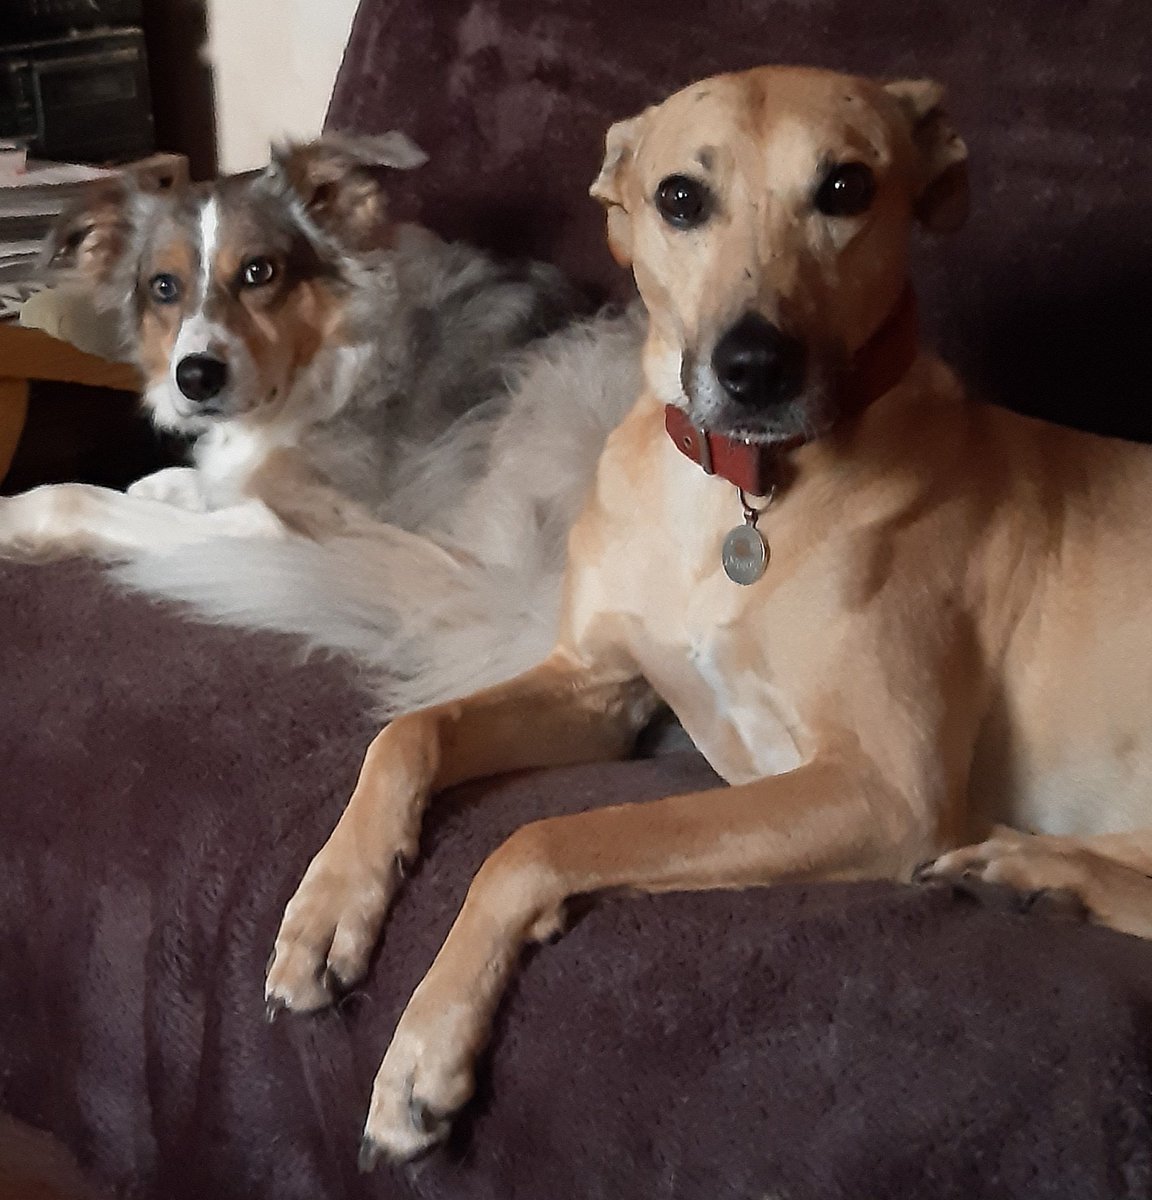 @segaboy08 @BCTGB @HartCollie @collierescuesa @CoraTheWhippet @whippetrescueir @WhippetRescue What a ridiculous combination of dogs!